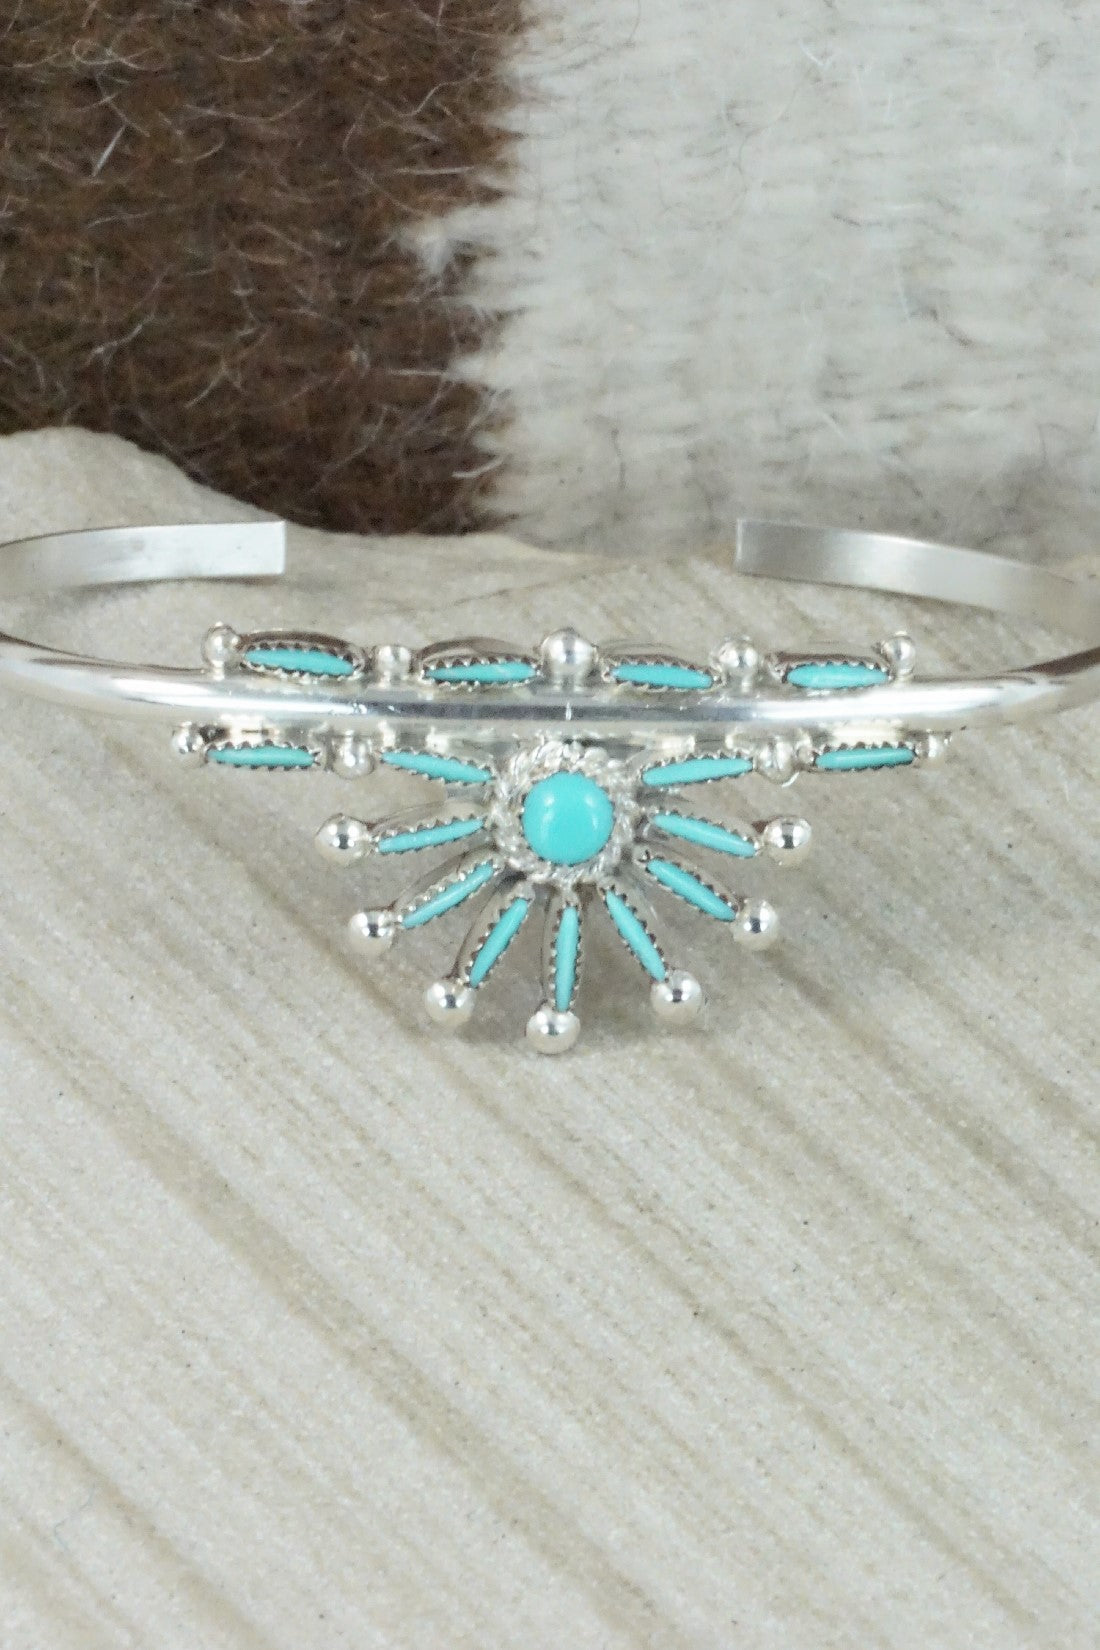 Turquoise & Sterling Silver Bracelet - Rena Cachina